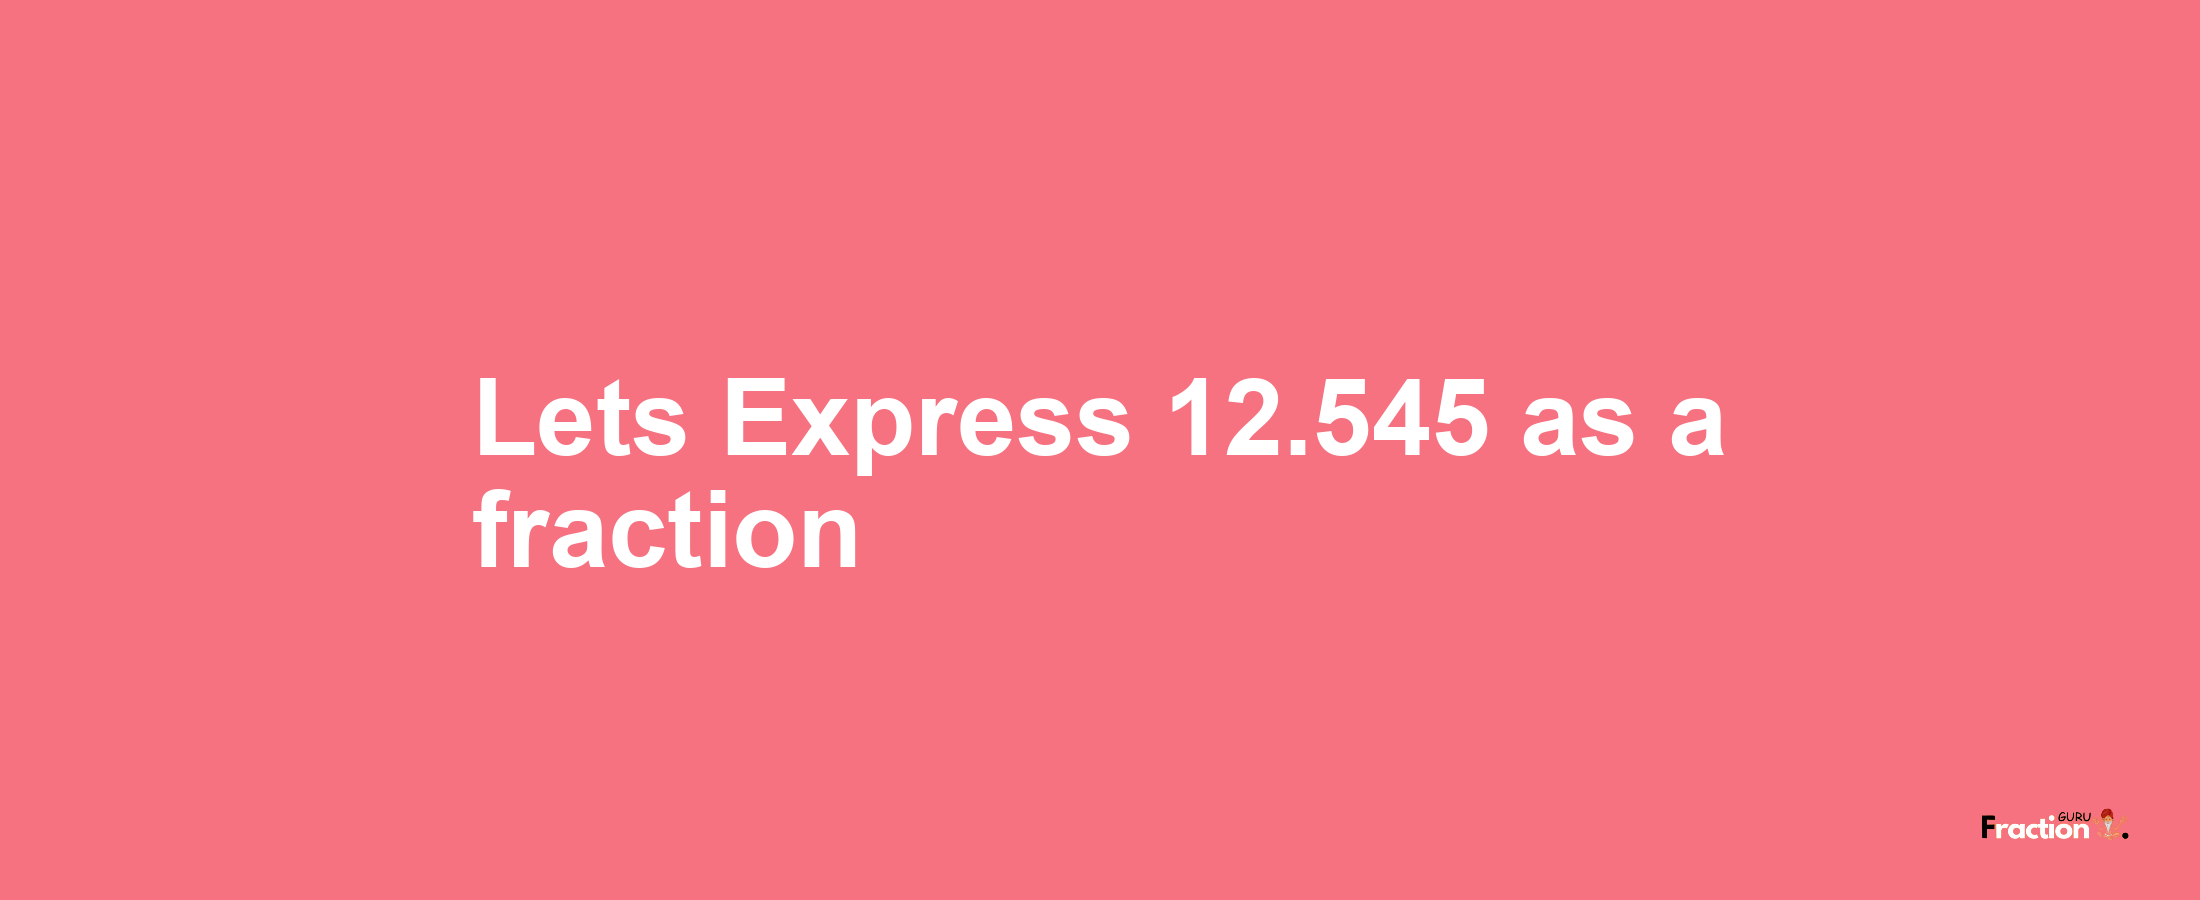 Lets Express 12.545 as afraction